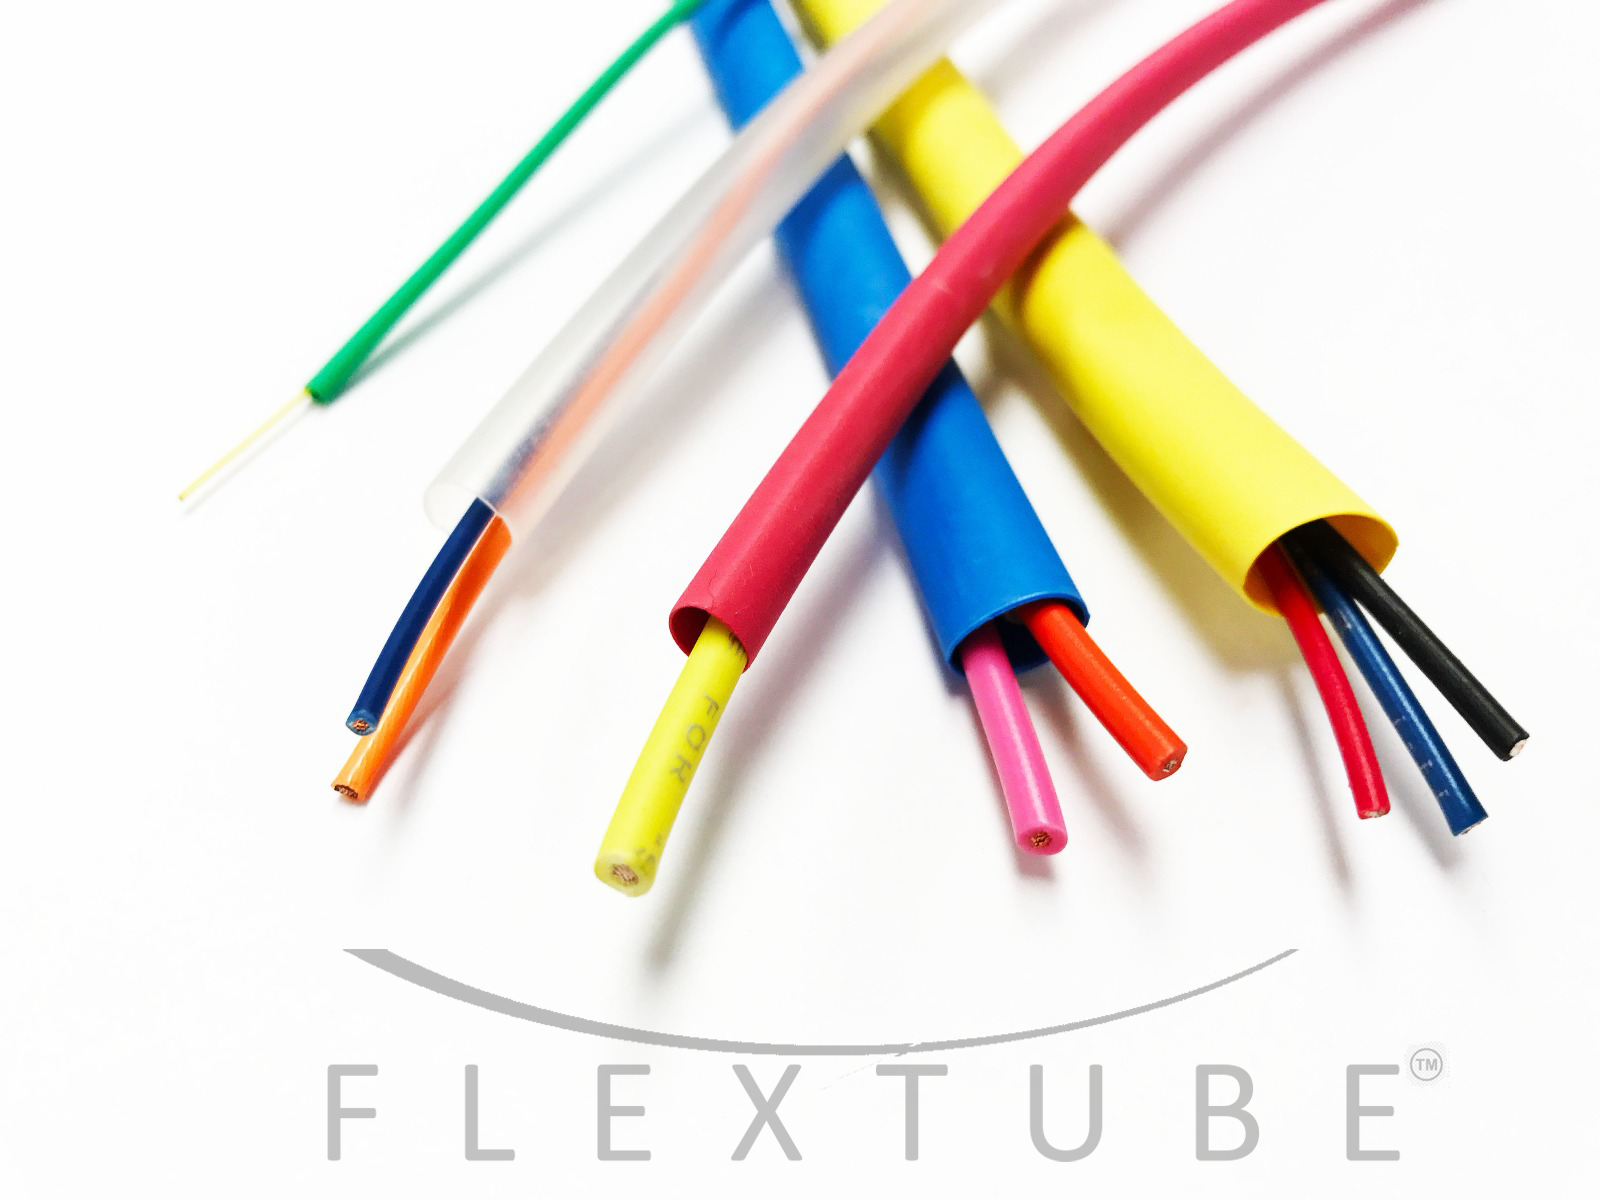 Home - Flexwires-Wires, Heat Shrink Tubing, Wire Hardness, and